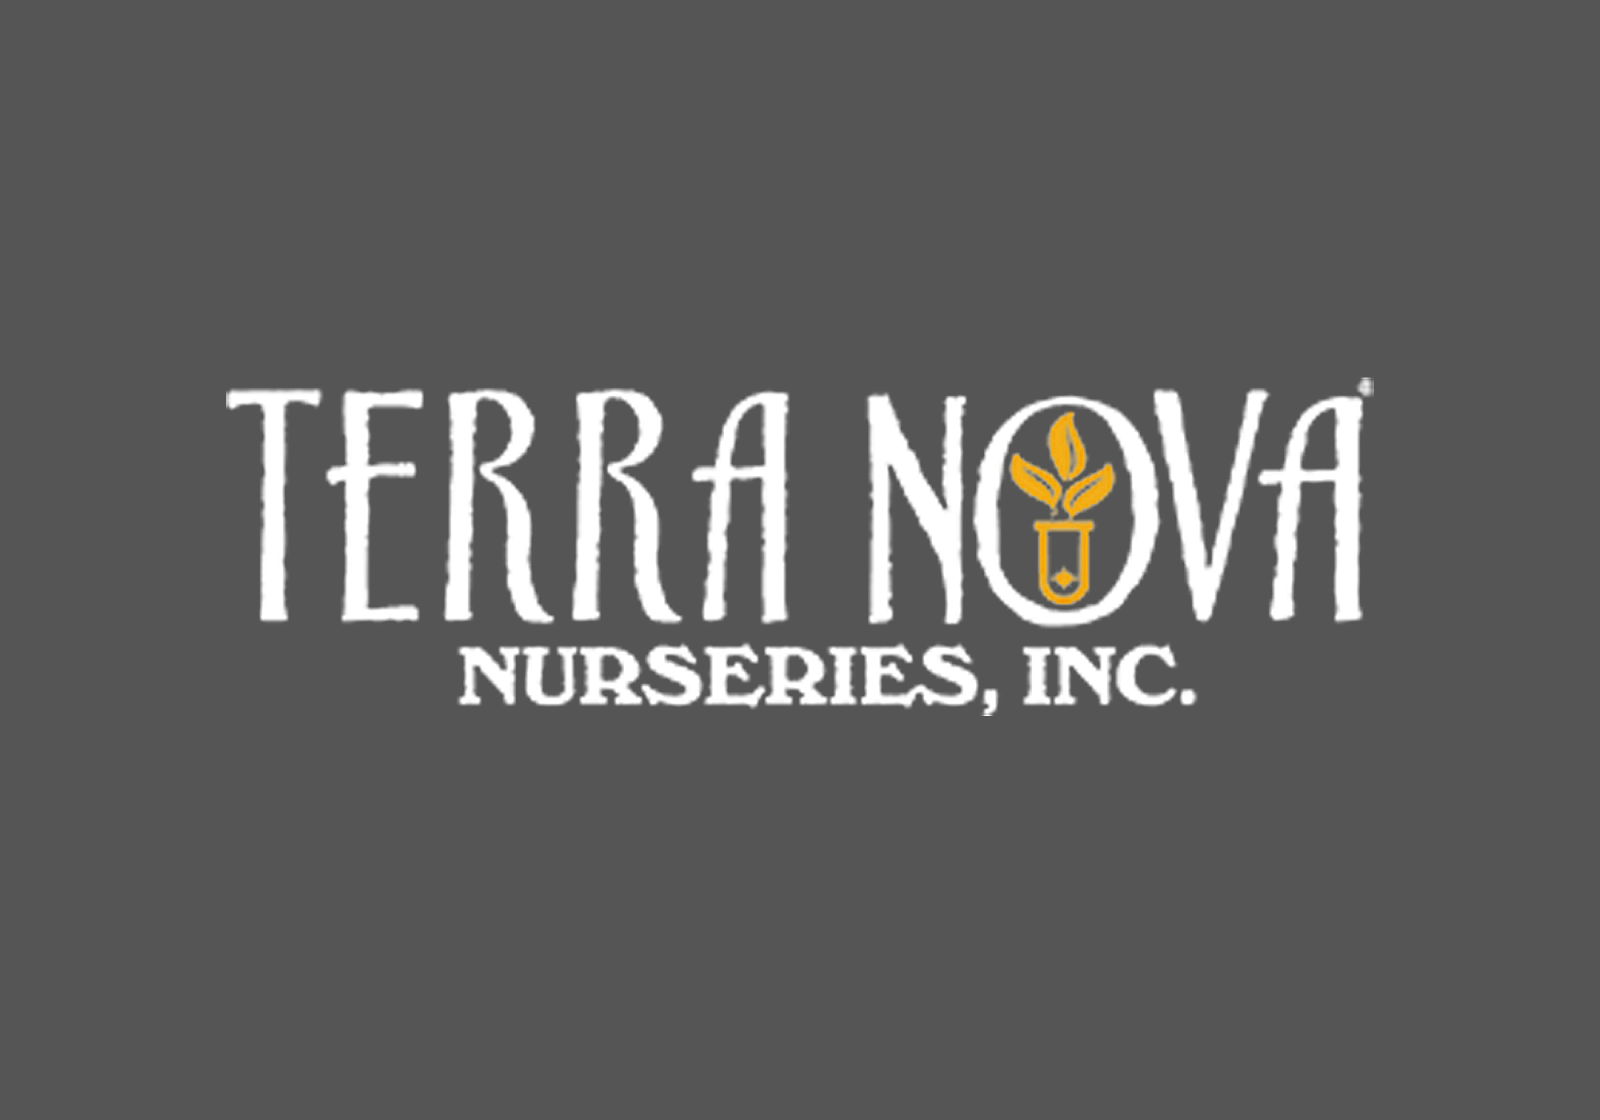 Terra Nova releases Colours of the Year